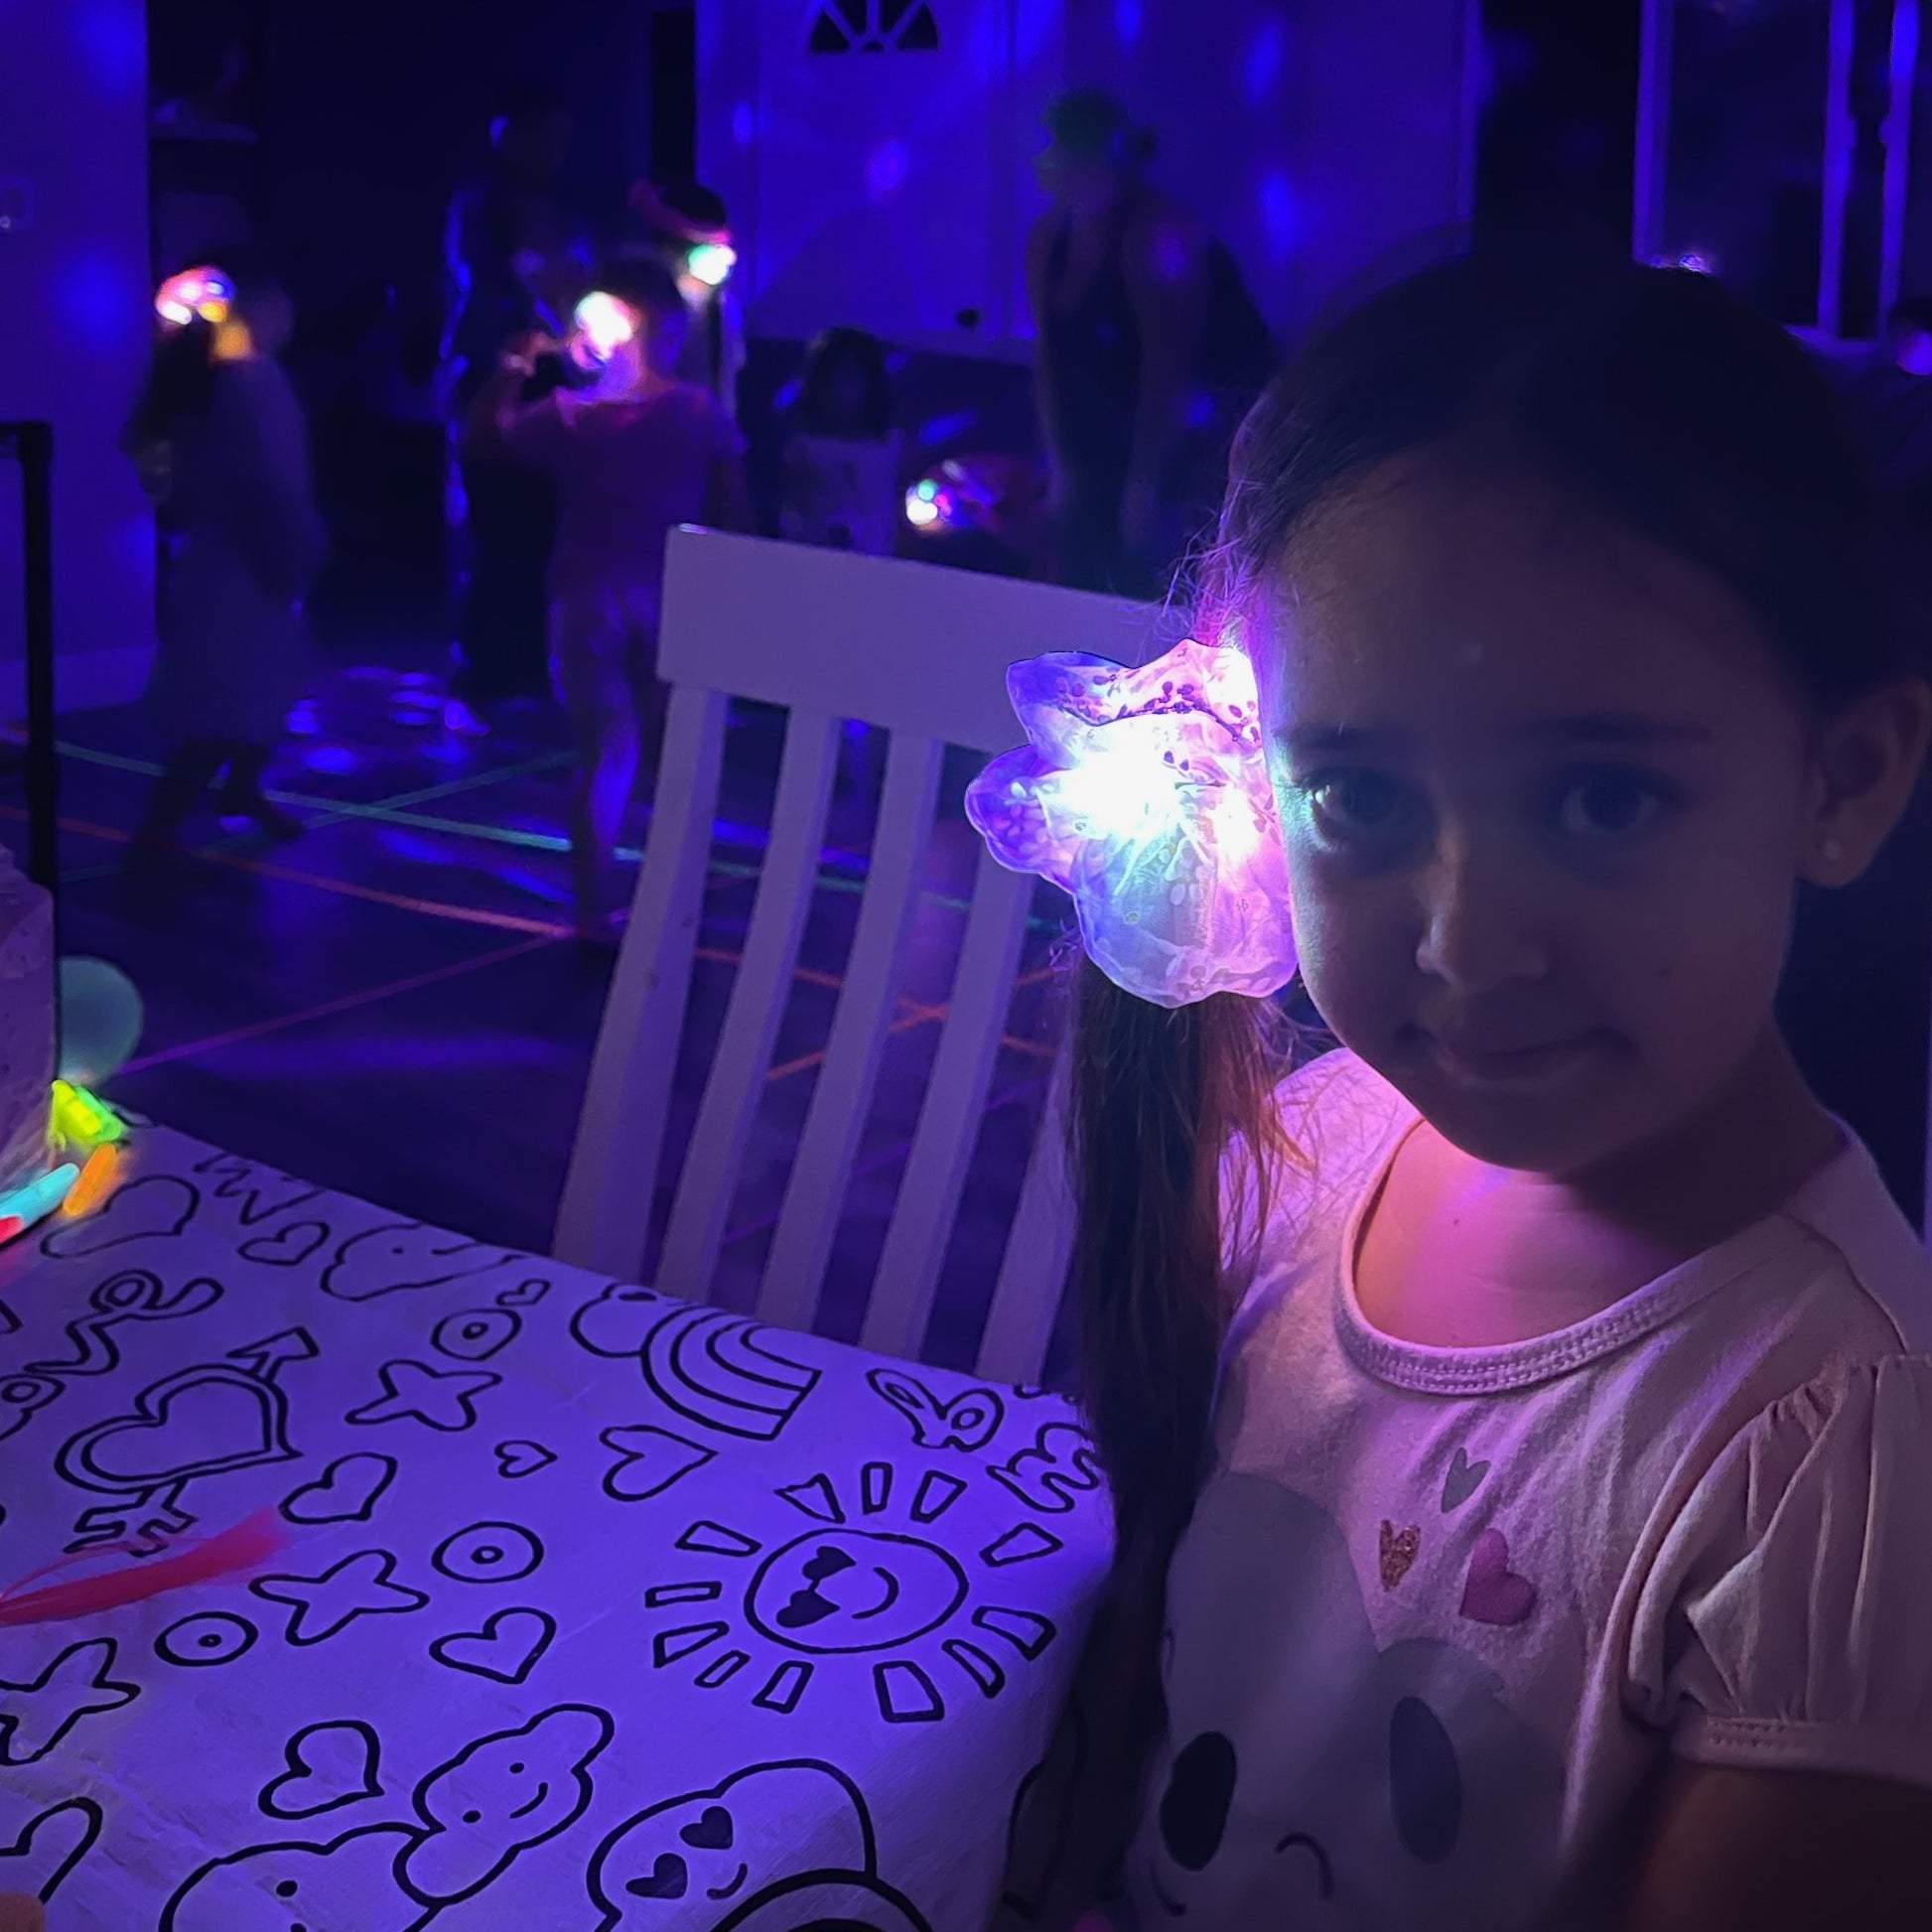 A little girl wear the LED light-up scrunchy in the dark with other scrunchies seen glowing in the background.